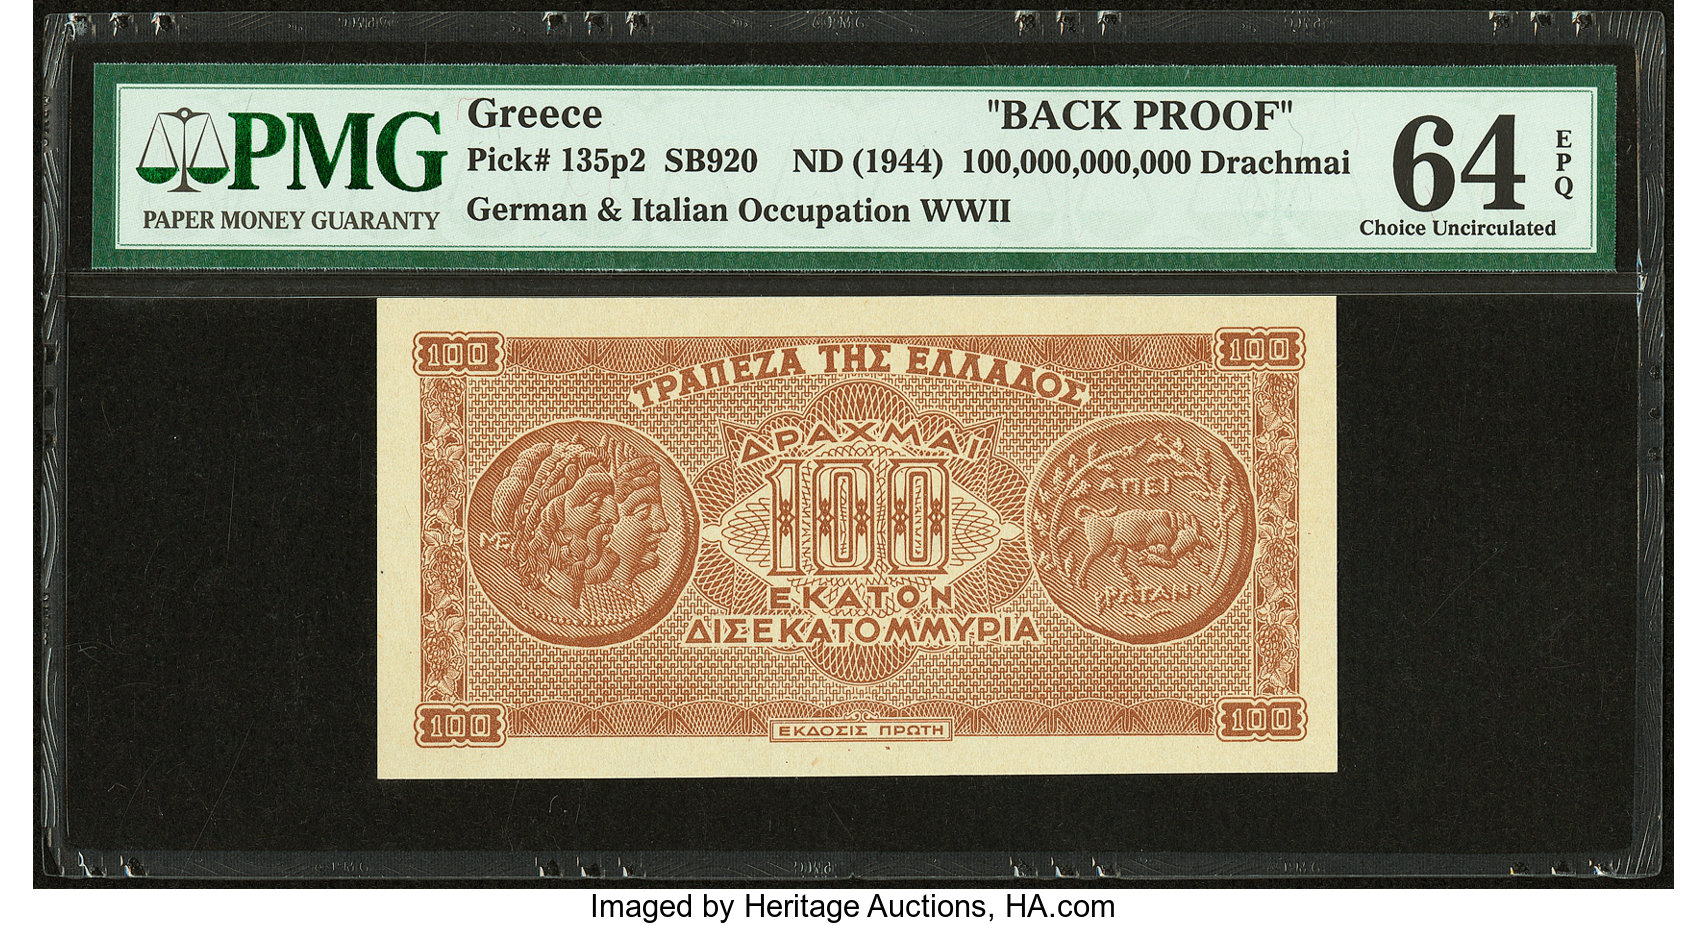 Greece German Occupation 100 000 000 000 Drachmai Nd 1944 Pick Lot Heritage Auctions